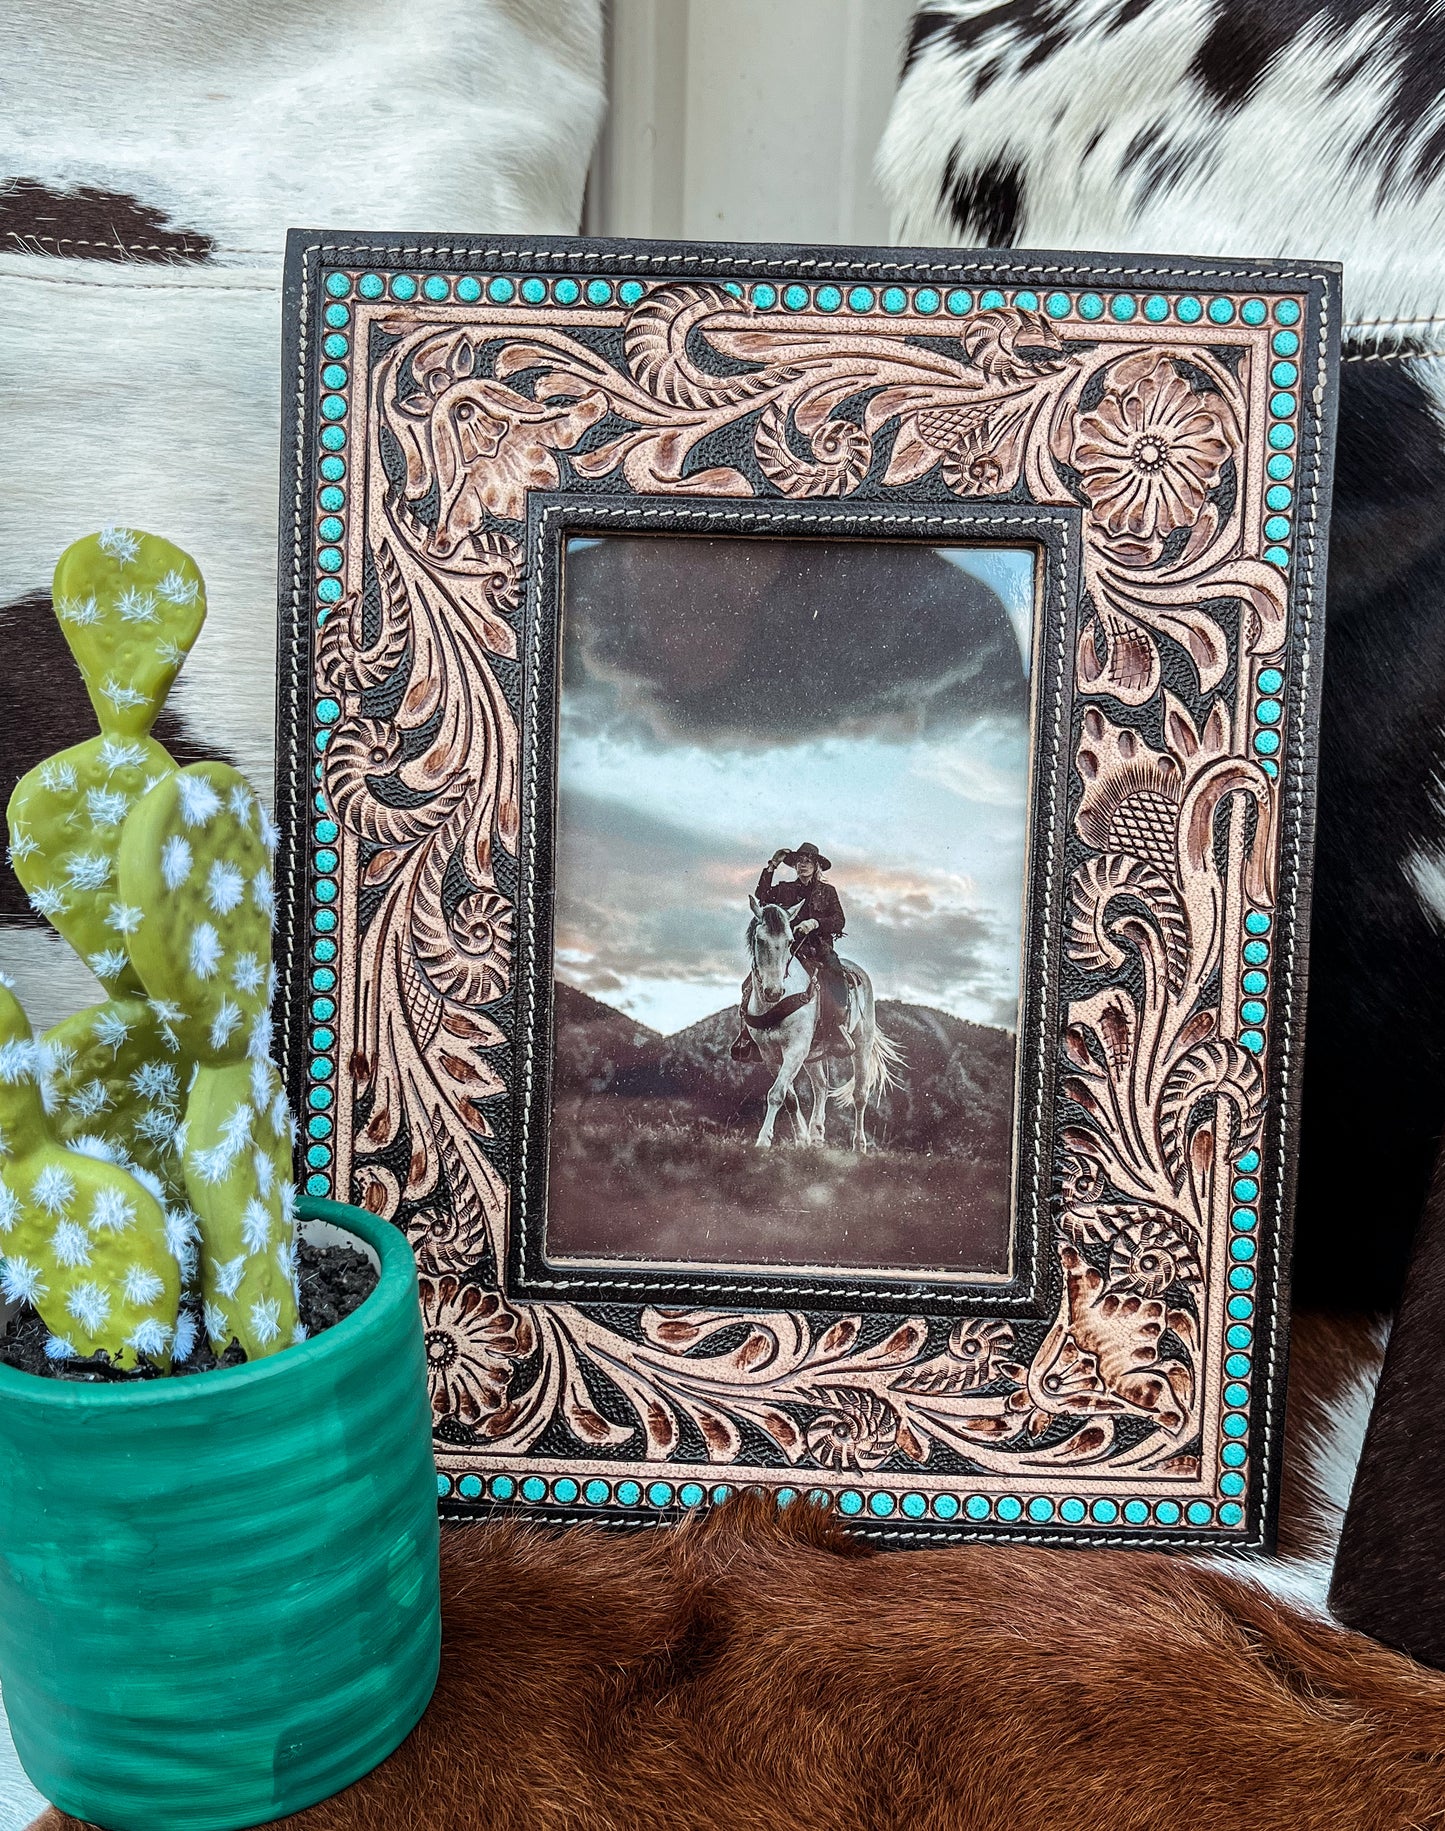 The Tooled & Turquoise Frame